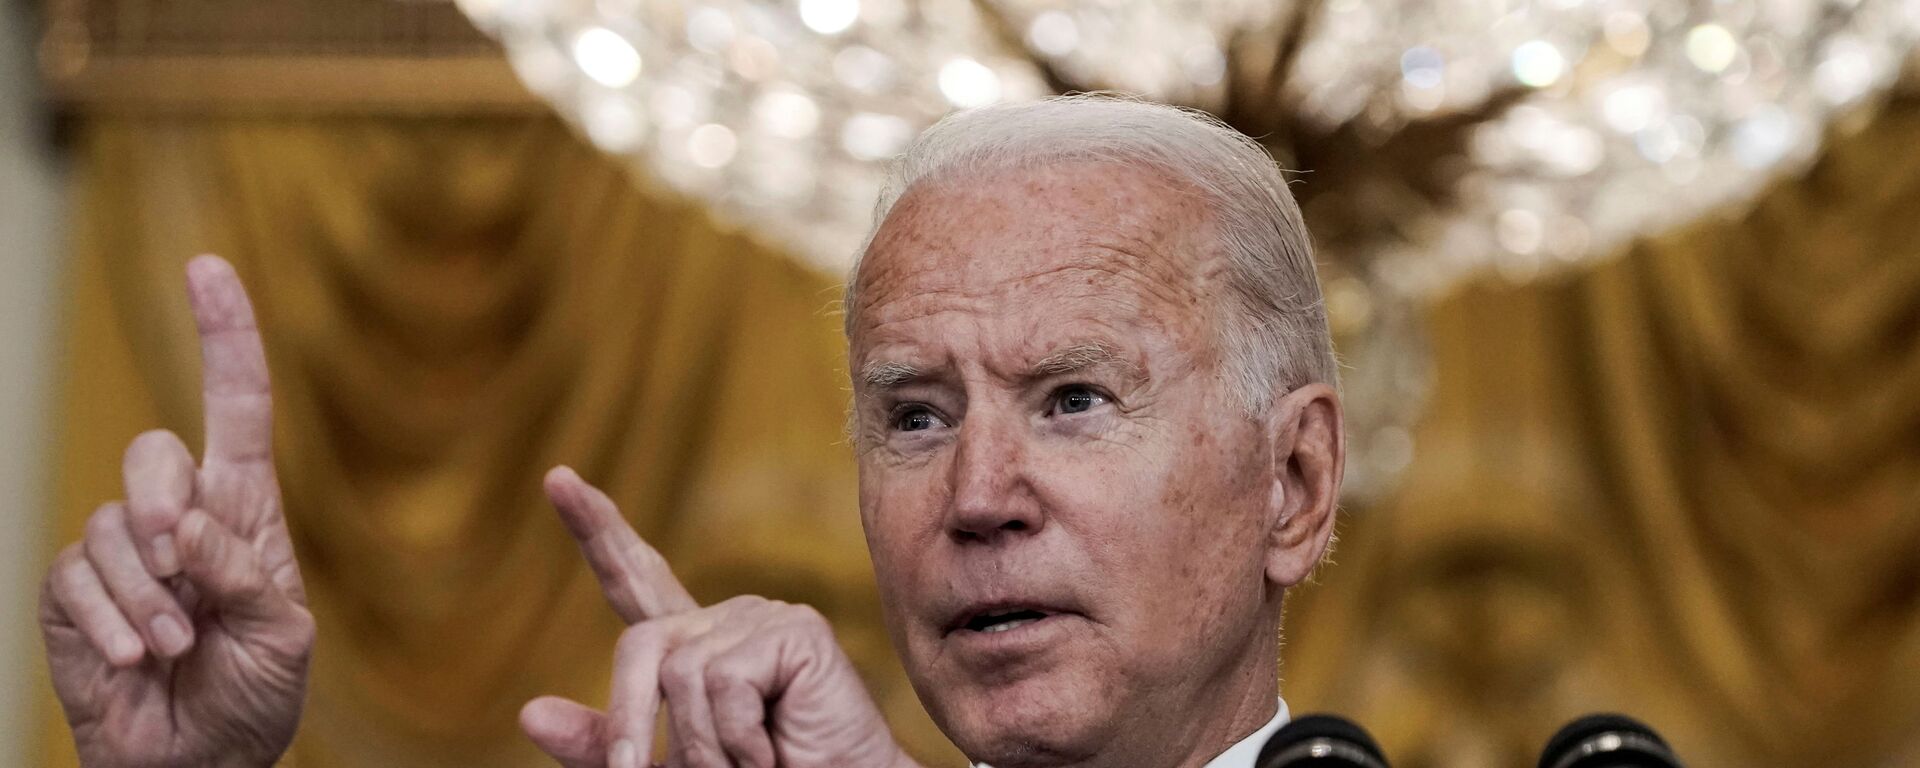 U.S.  President Joe Biden delivers remarks on evacuation efforts and the ongoing situation in Afghanistan during a speech in the East Room at the White House in Washington, U.S., August 20, 2021. - Sputnik International, 1920, 21.08.2021